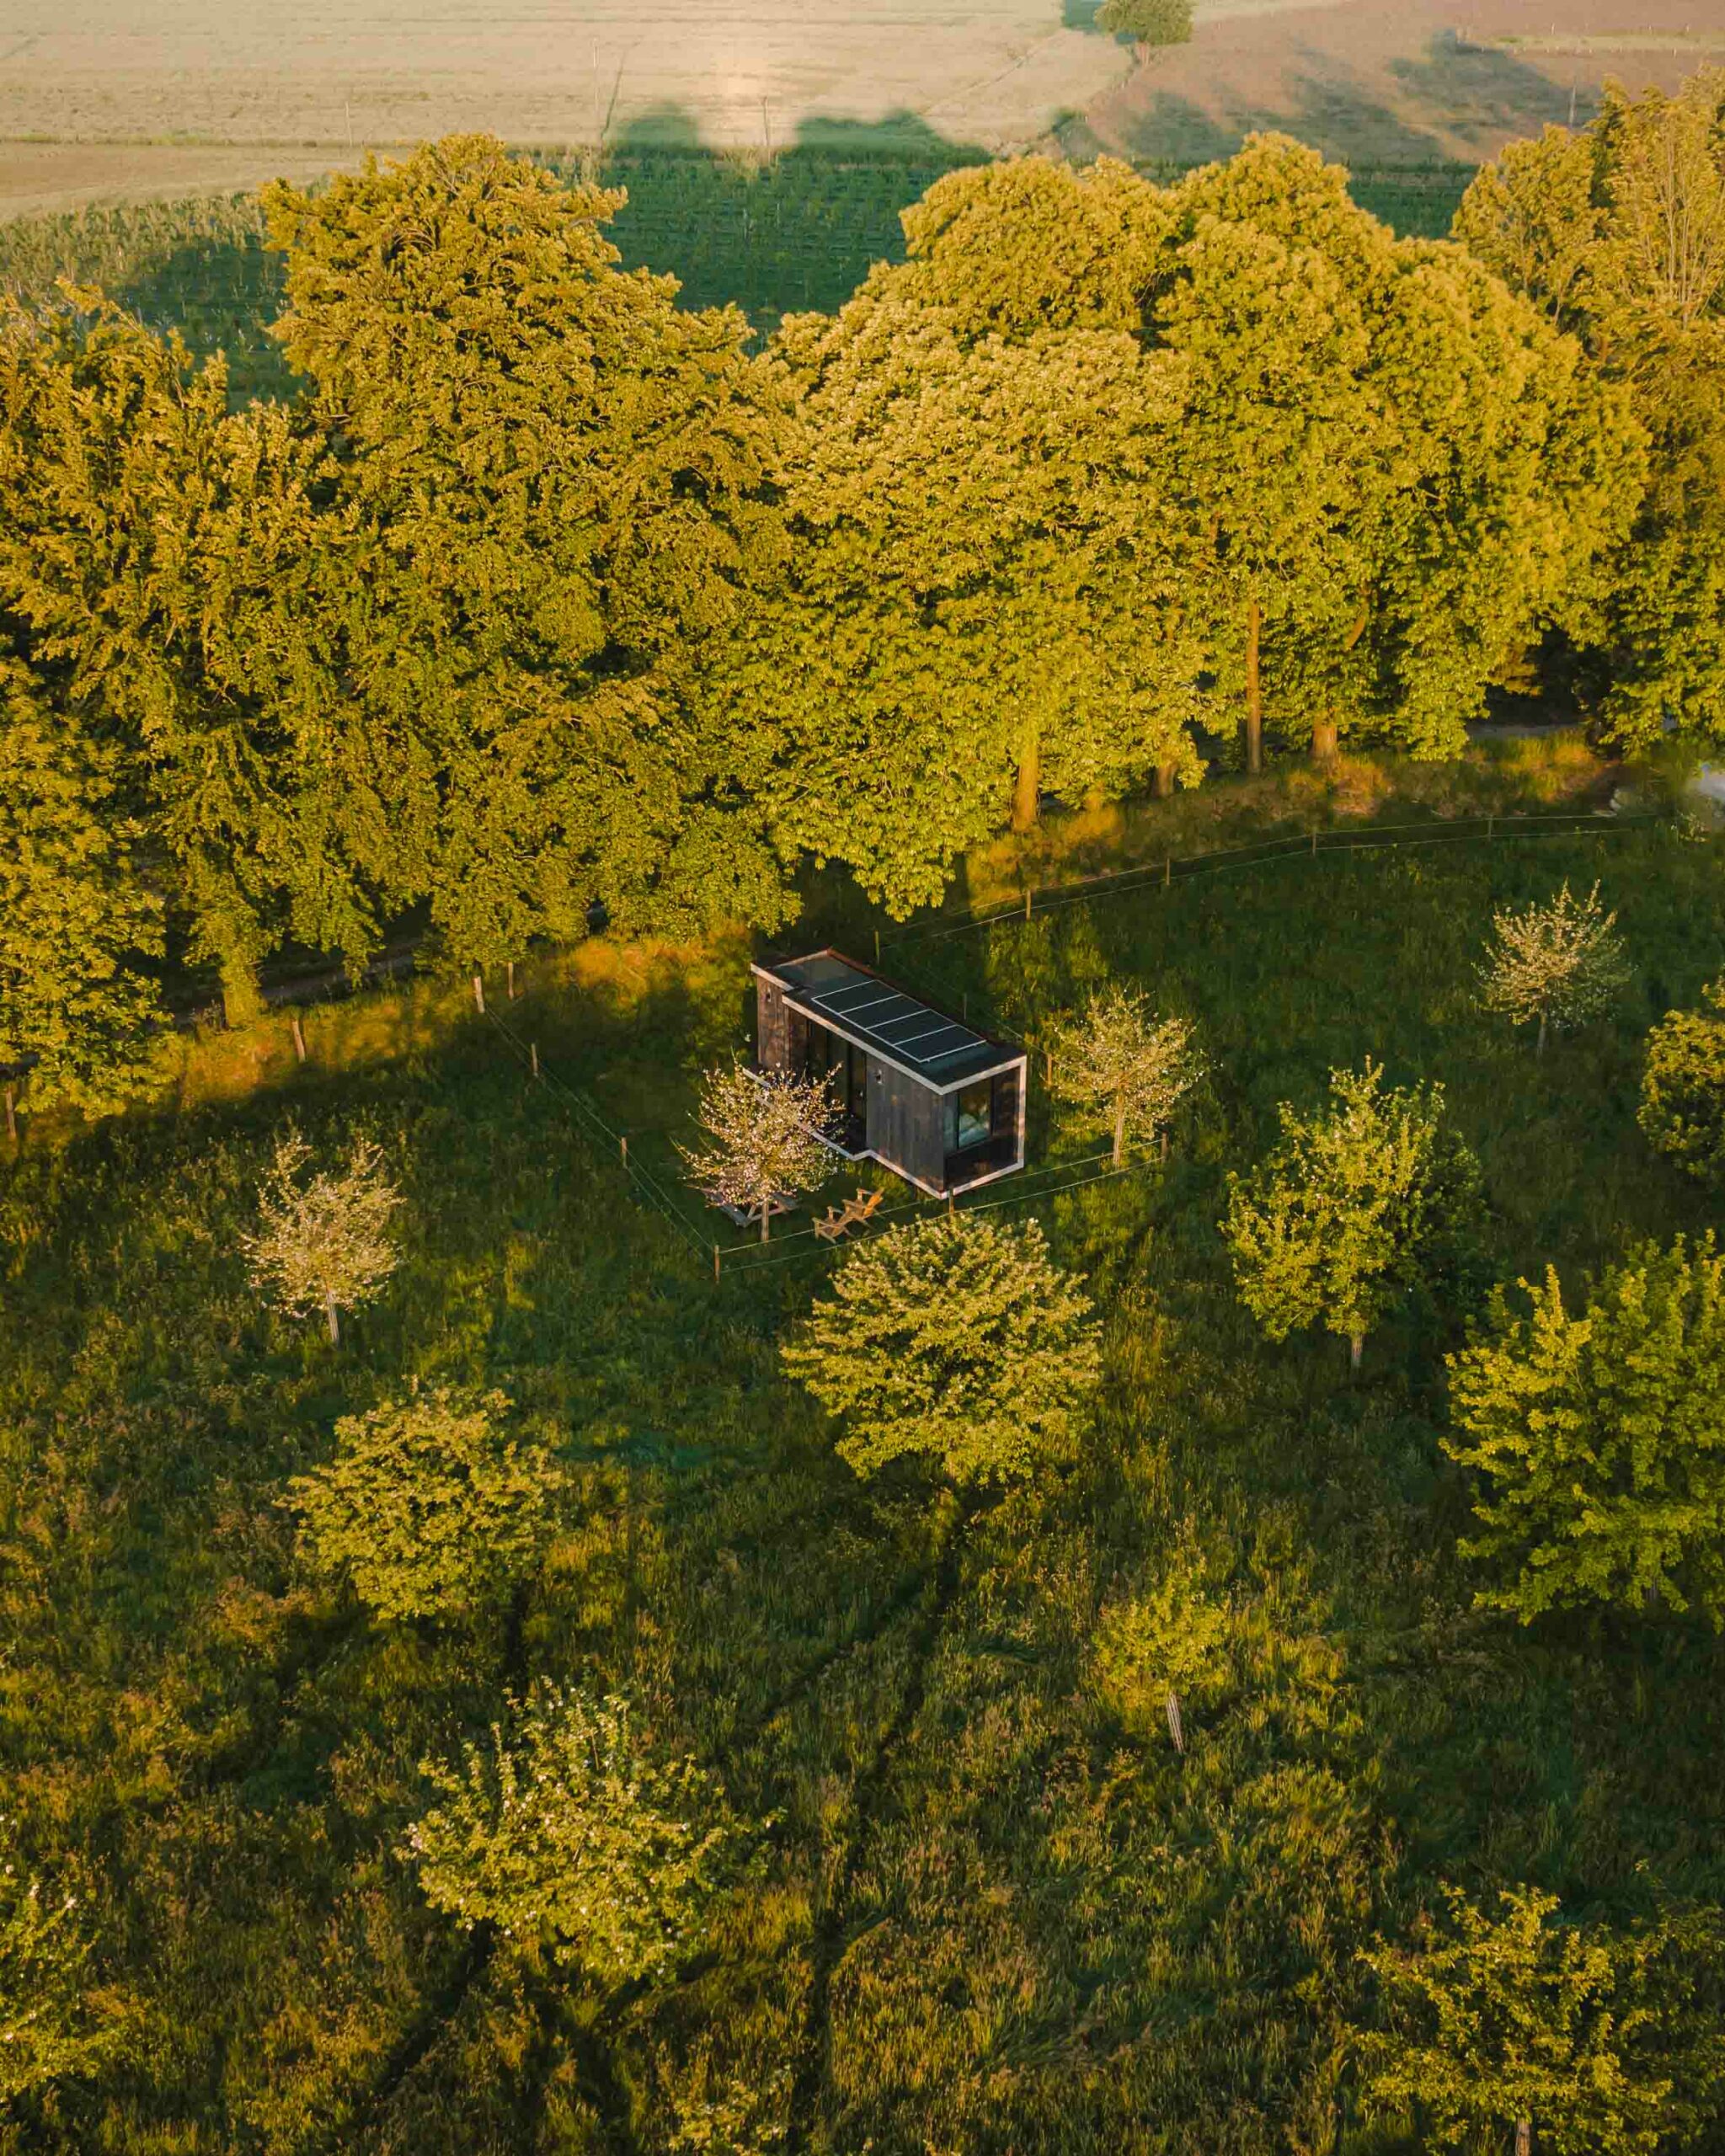 Tiny House in the heart of the orchards